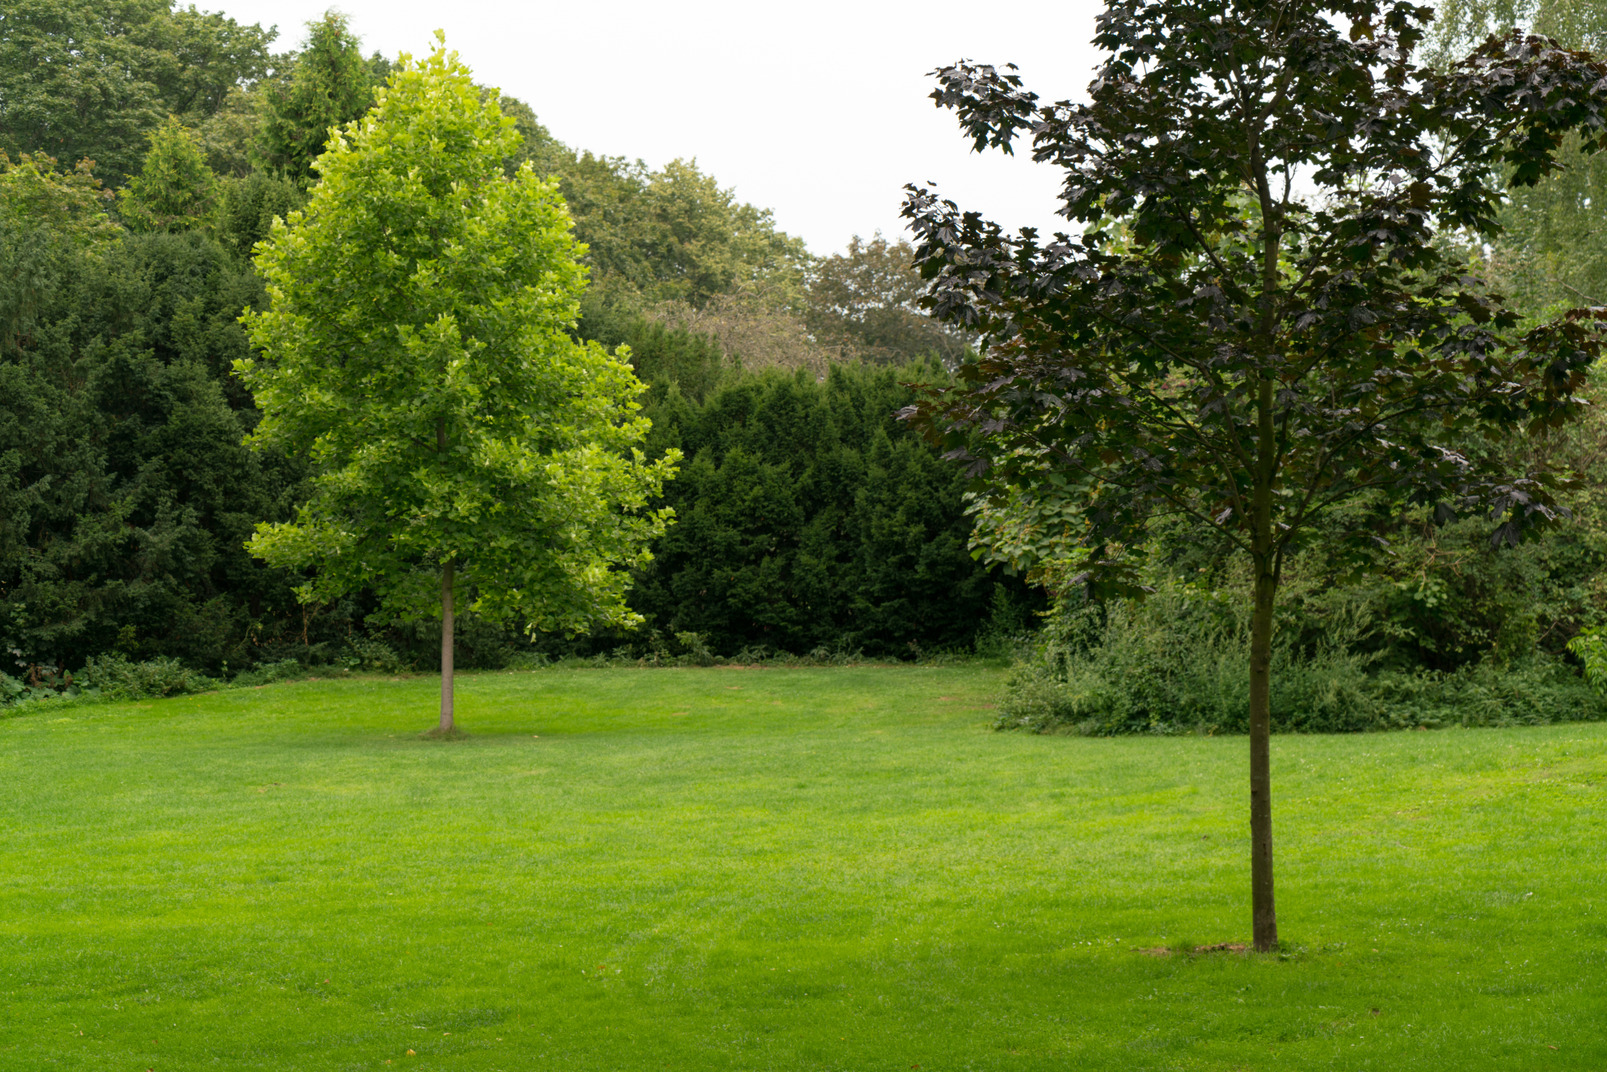 Beautiful view of a green lawn with trees